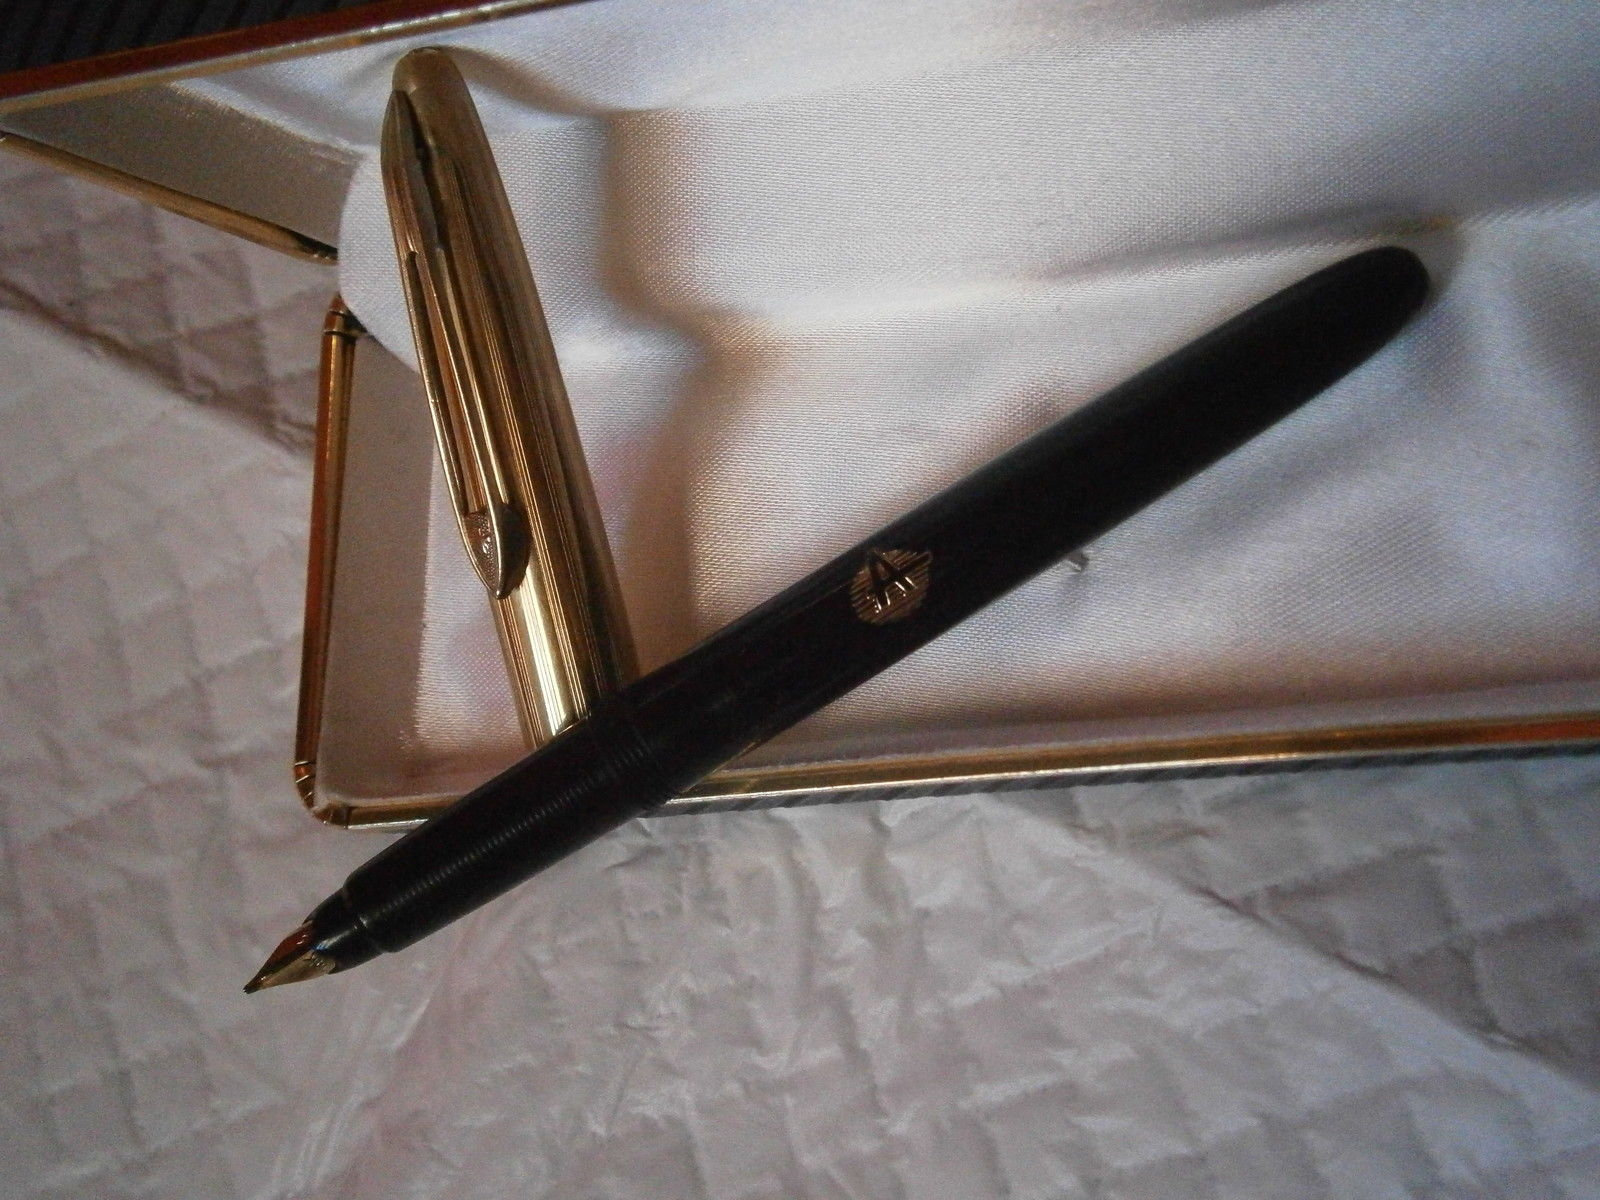 Primary image for DIPLOMAT fountain pen Black and Gold 14K Original in gift box